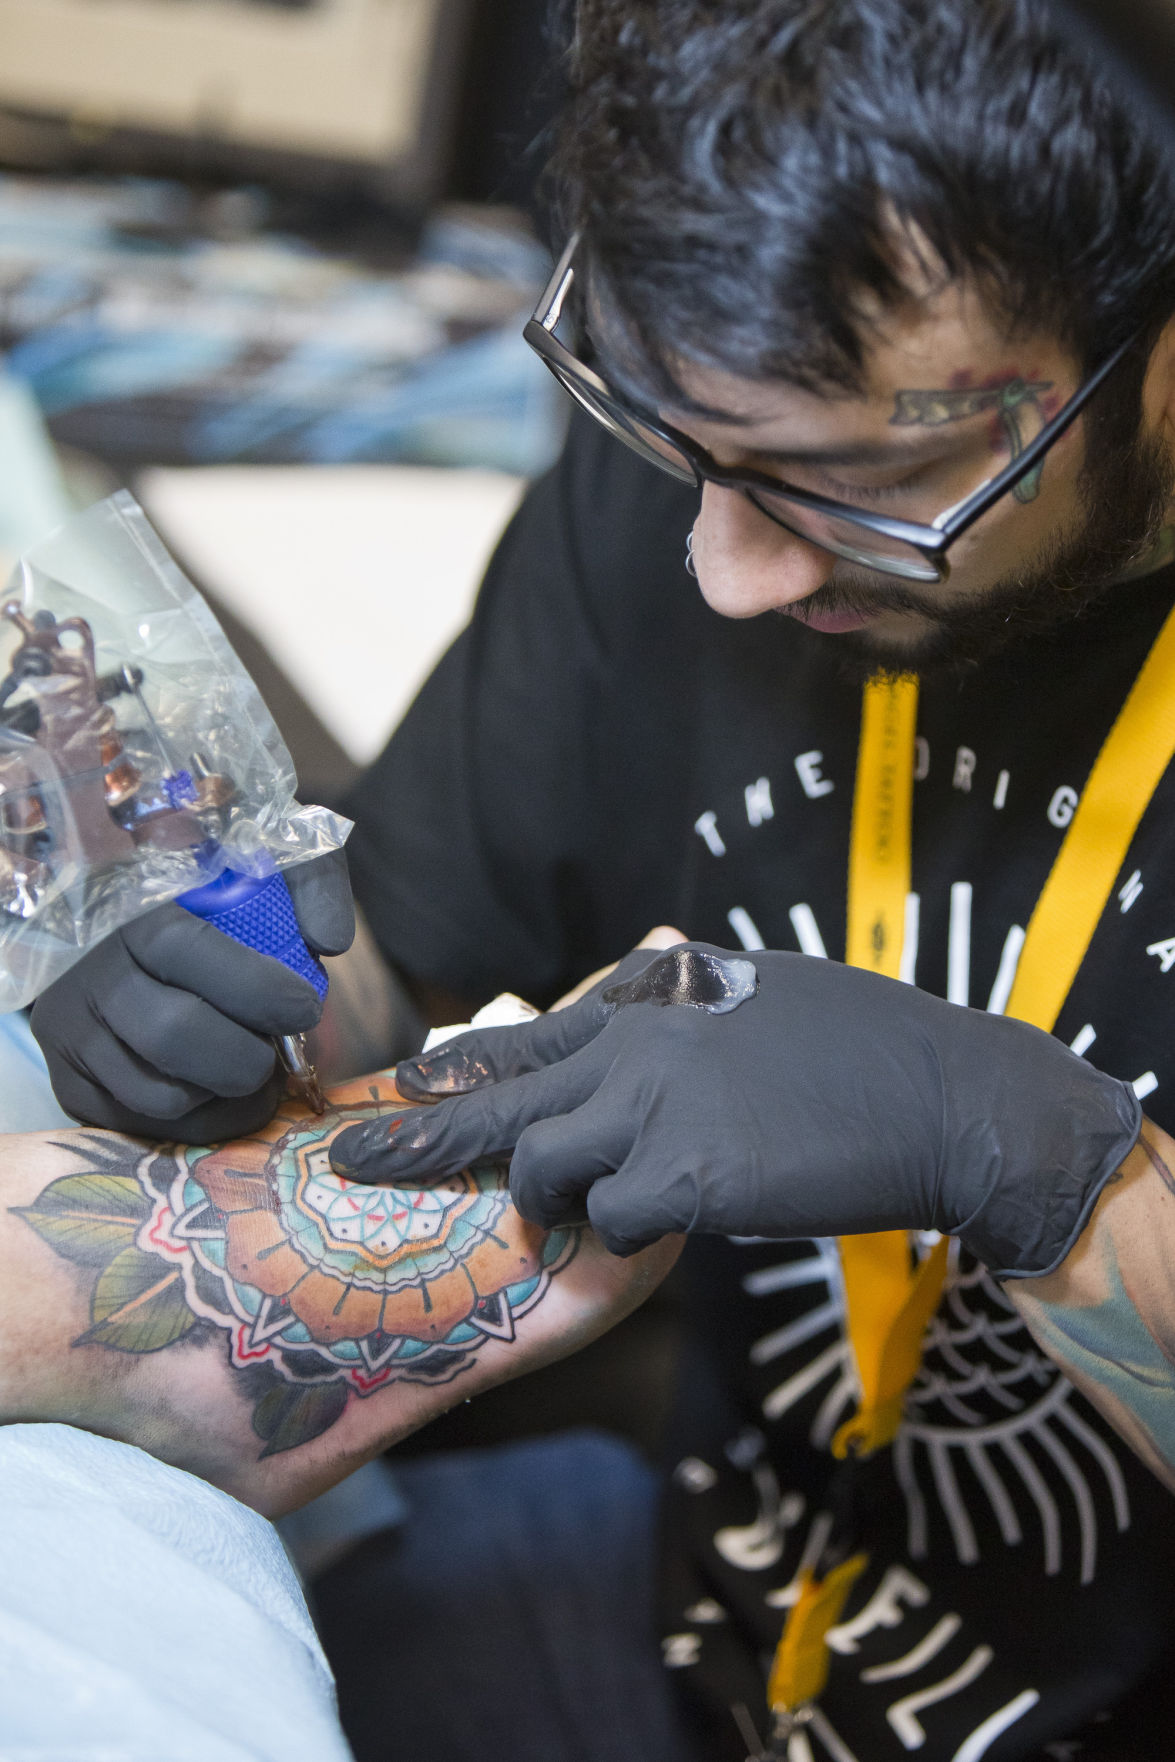 Pon tattoo artist featured in Ink Master tattoos at Lancaster event  photos  Entertainment  lancasteronlinecom